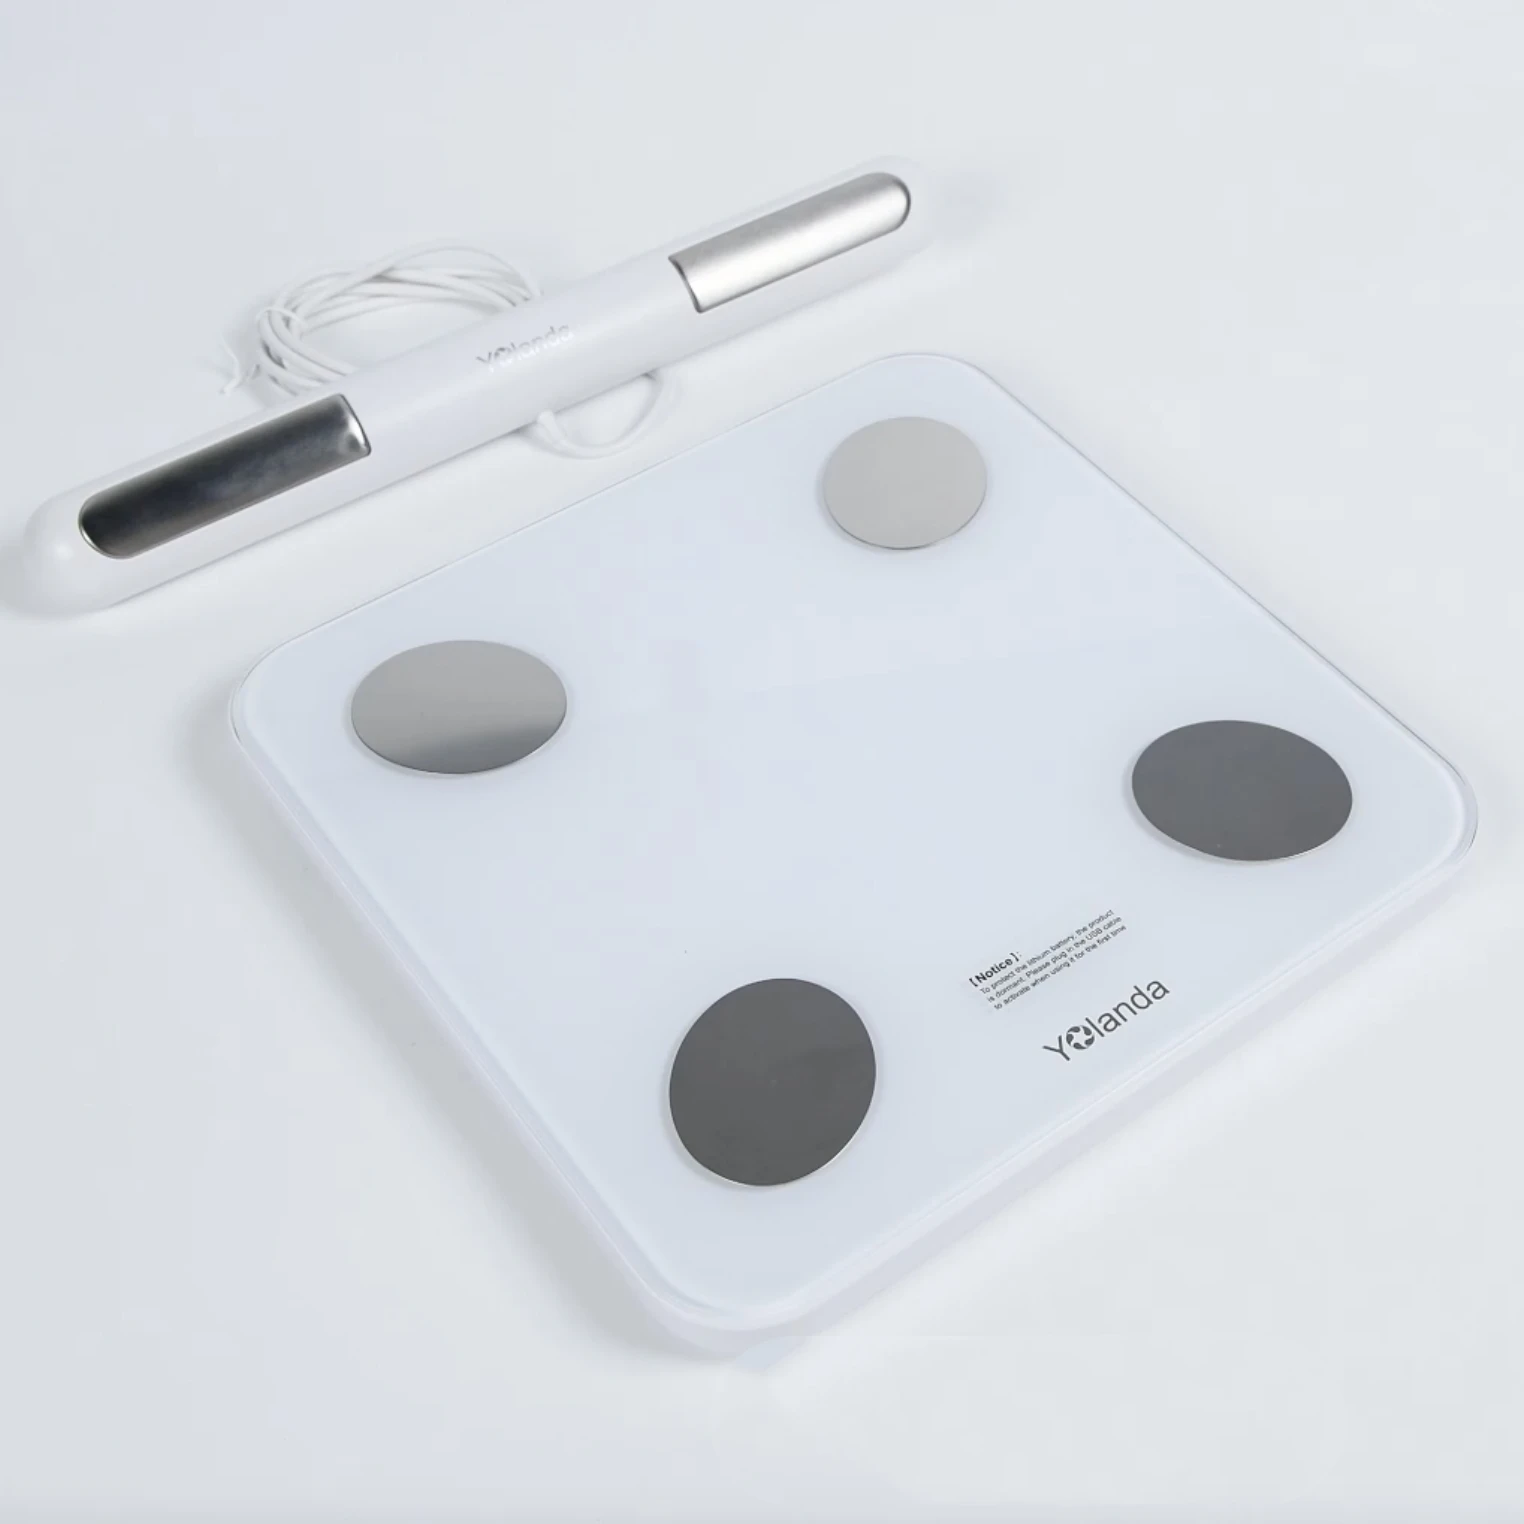 

8 Electrode Smart Body Composition Scale Tempered Glass Weighing Scales Digital Body Fat Balance Fitness Measuring Analyzer